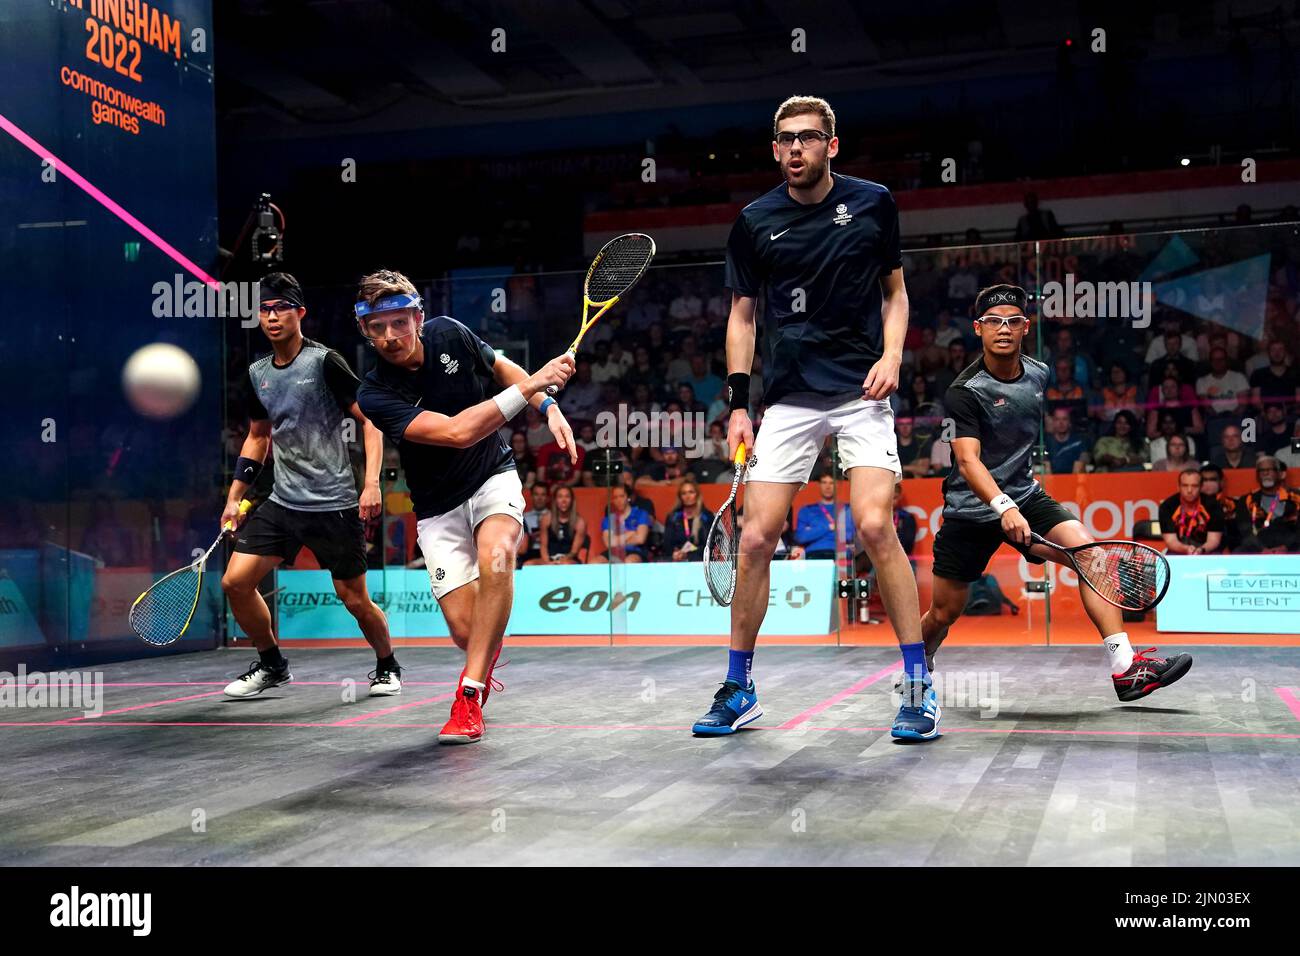 Scotland's Greg Lobban (second left) and Rory Stewart during the Men's Squash Doubles Bronze Medal Match against Malaysia's Yow Eain and Chee Wern Yuen at the University of Birmingham Hockey and Squash Centre on day eleven of the 2022 Commonwealth Games in Birmingham. Picture date: Monday August 8, 2022. Stock Photo